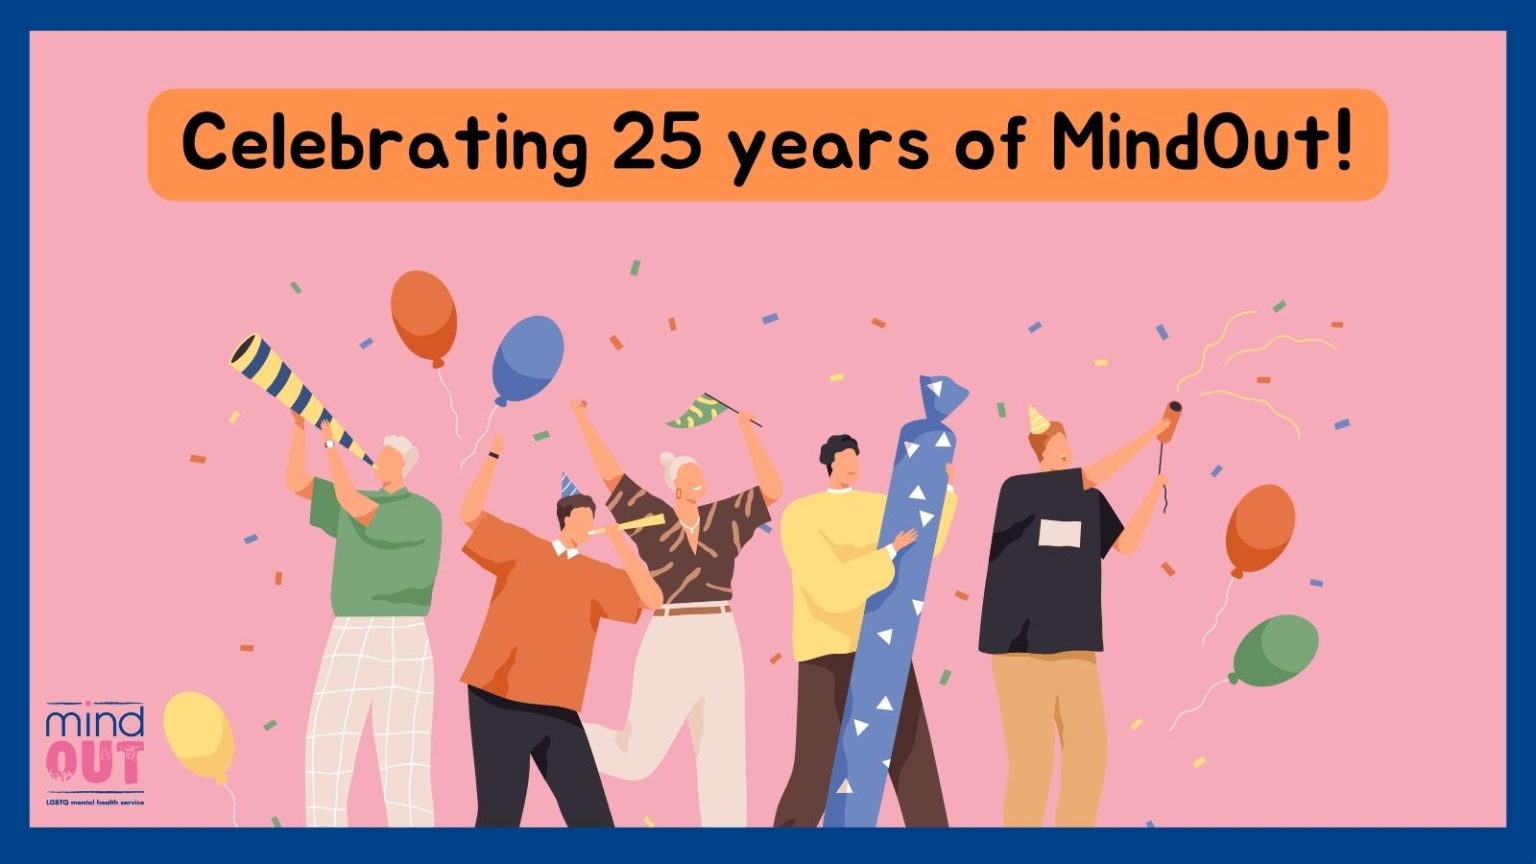 Let your imagination run wild for the UK’s first LGBTQ+ mental health charity, MindOut, which celebrates its 25th birthday in May